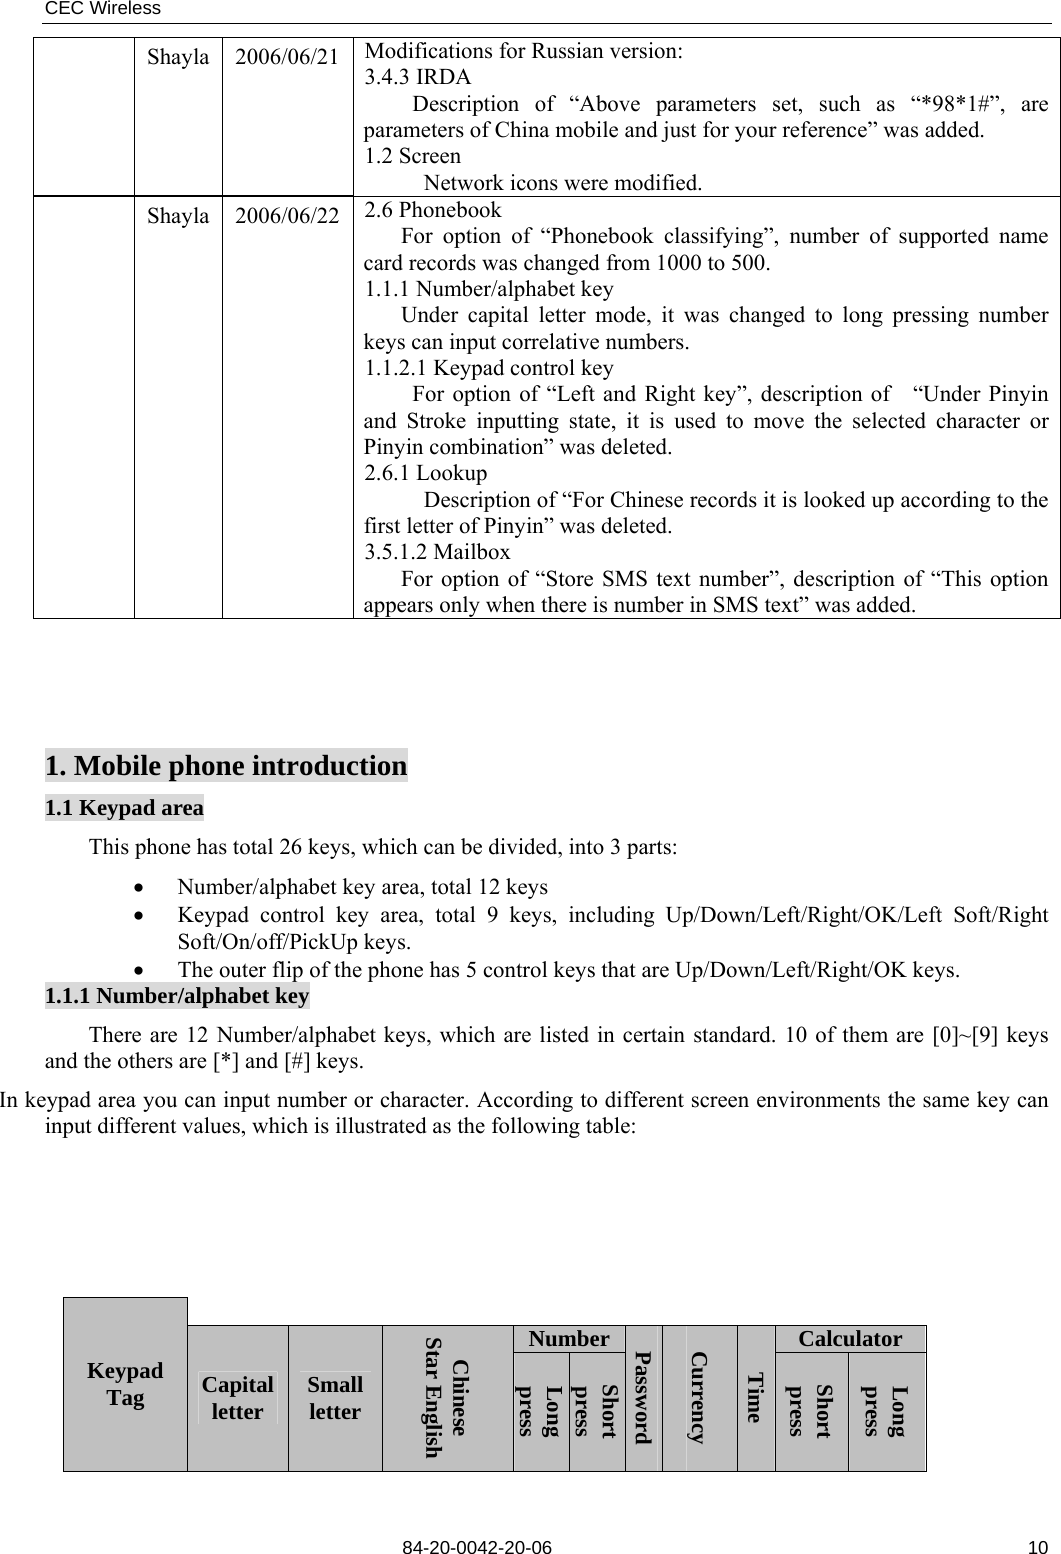 CEC Wireless       84-20-0042-20-06                                                               10 Shayla 2006/06/21 Modifications for Russian version:     3.4.3 IRDA  Description of “Above parameters set, such as “*98*1#”, are parameters of China mobile and just for your reference” was added. 1.2 Screen   Network icons were modified.  Shayla 2006/06/22 2.6 Phonebook For option of “Phonebook classifying”, number of supported name card records was changed from 1000 to 500. 1.1.1 Number/alphabet key Under capital letter mode, it was changed to long pressing number keys can input correlative numbers. 1.1.2.1 Keypad control key   For option of “Left and Right key”, description of   “Under Pinyin and Stroke inputting state, it is used to move the selected character or Pinyin combination” was deleted. 2.6.1 Lookup     Description of “For Chinese records it is looked up according to the first letter of Pinyin” was deleted. 3.5.1.2 Mailbox For option of “Store SMS text number”, description of “This option appears only when there is number in SMS text” was added.   1. Mobile phone introduction 1.1 Keypad area This phone has total 26 keys, which can be divided, into 3 parts:     • Number/alphabet key area, total 12 keys • Keypad control key area, total 9 keys, including Up/Down/Left/Right/OK/Left Soft/Right Soft/On/off/PickUp keys. • The outer flip of the phone has 5 control keys that are Up/Down/Left/Right/OK keys. 1.1.1 Number/alphabet key There are 12 Number/alphabet keys, which are listed in certain standard. 10 of them are [0]~[9] keys and the others are [*] and [#] keys. In keypad area you can input number or character. According to different screen environments the same key can input different values, which is illustrated as the following table:           Number Calculator Keypad Tag  Capital letter  Small letter Chinese Star English Long press Short press Password Currency Time Short press Long press 